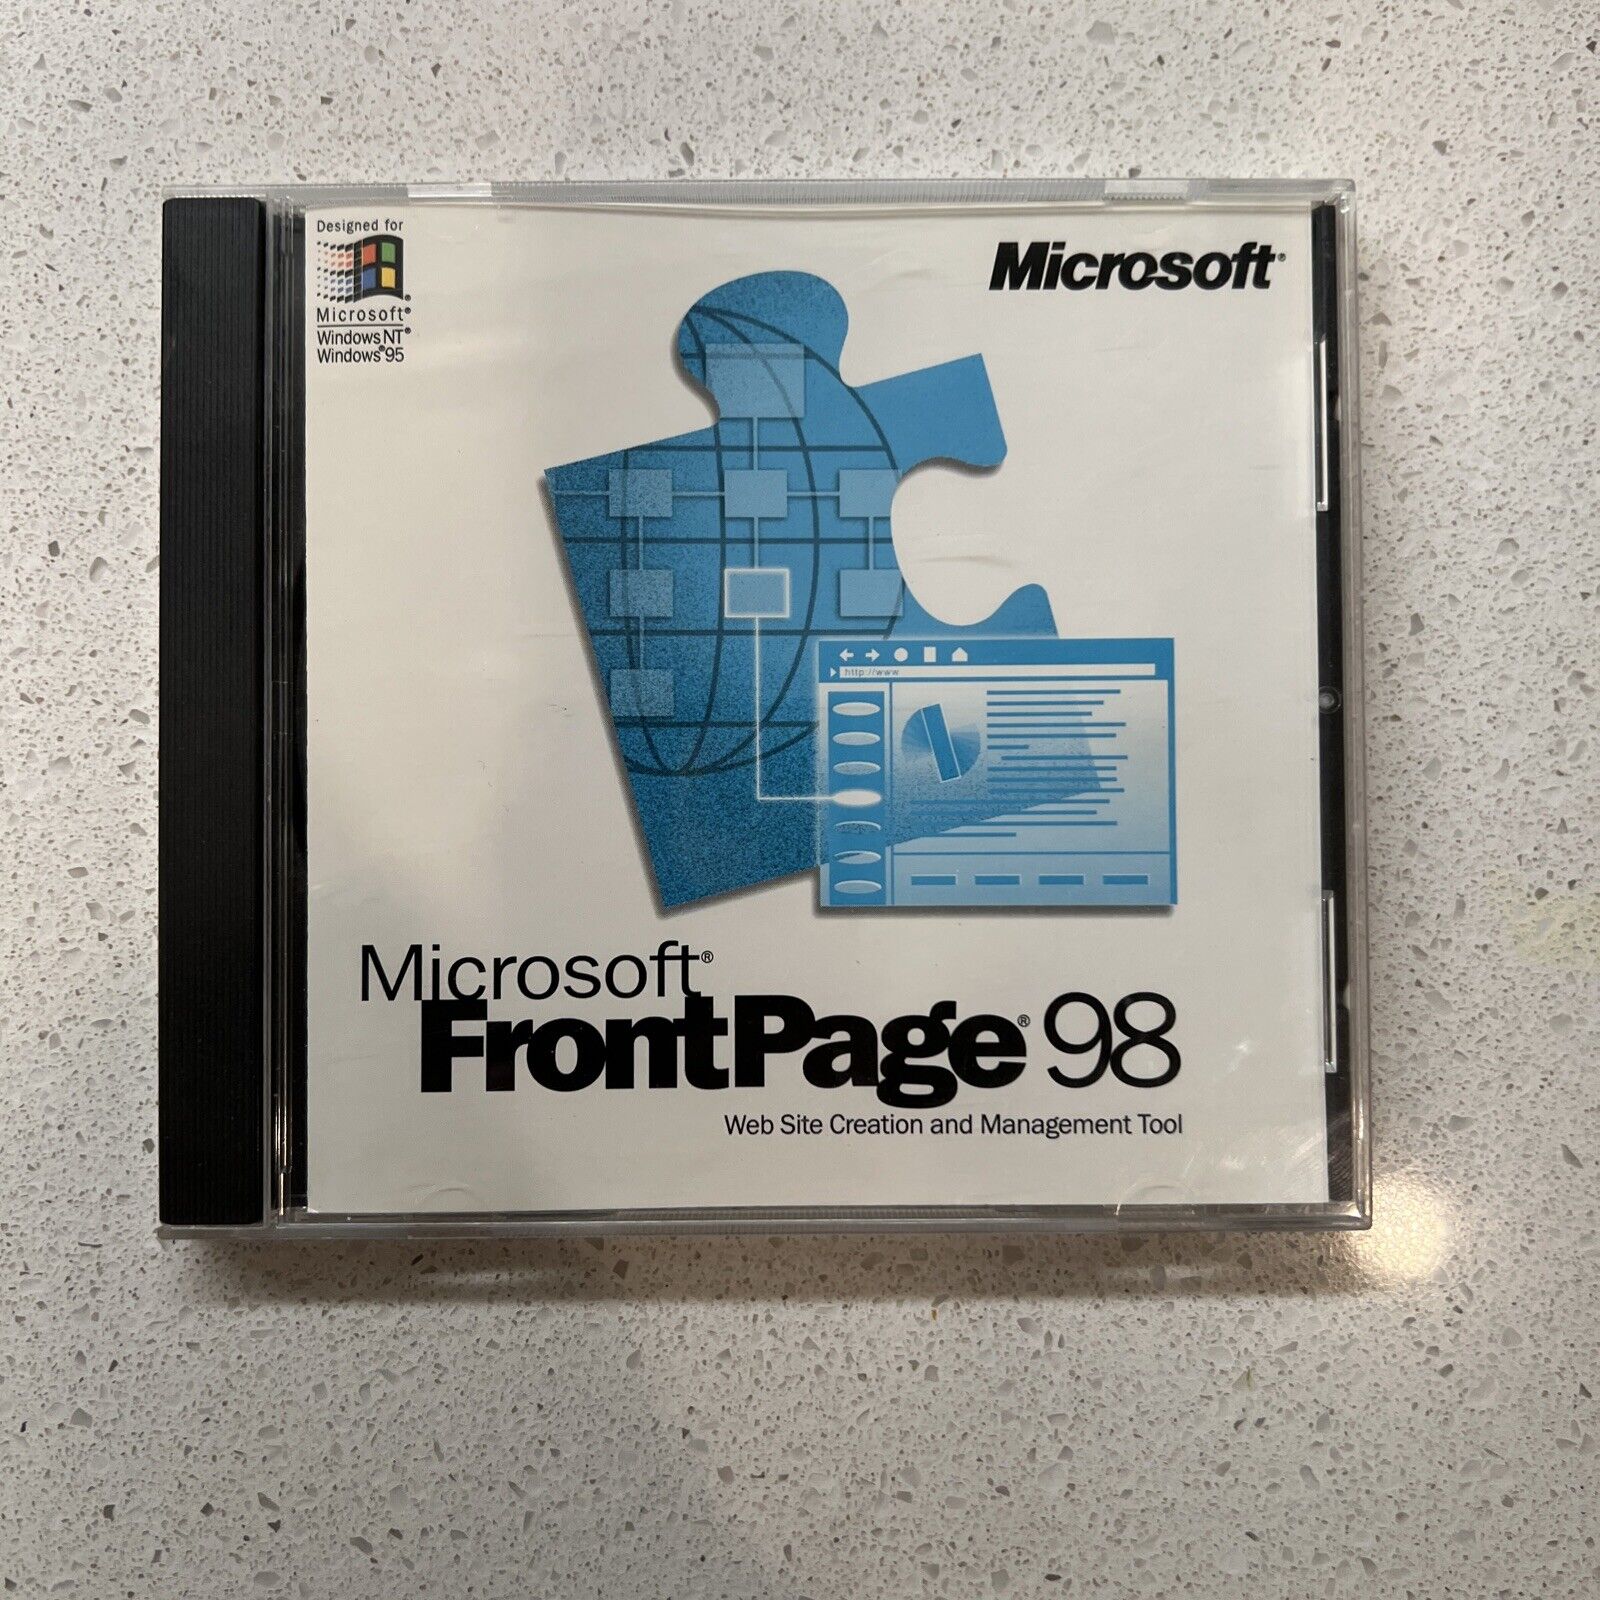 Microsoft Frontpage 98 Full Version For Windows W/ Product Key